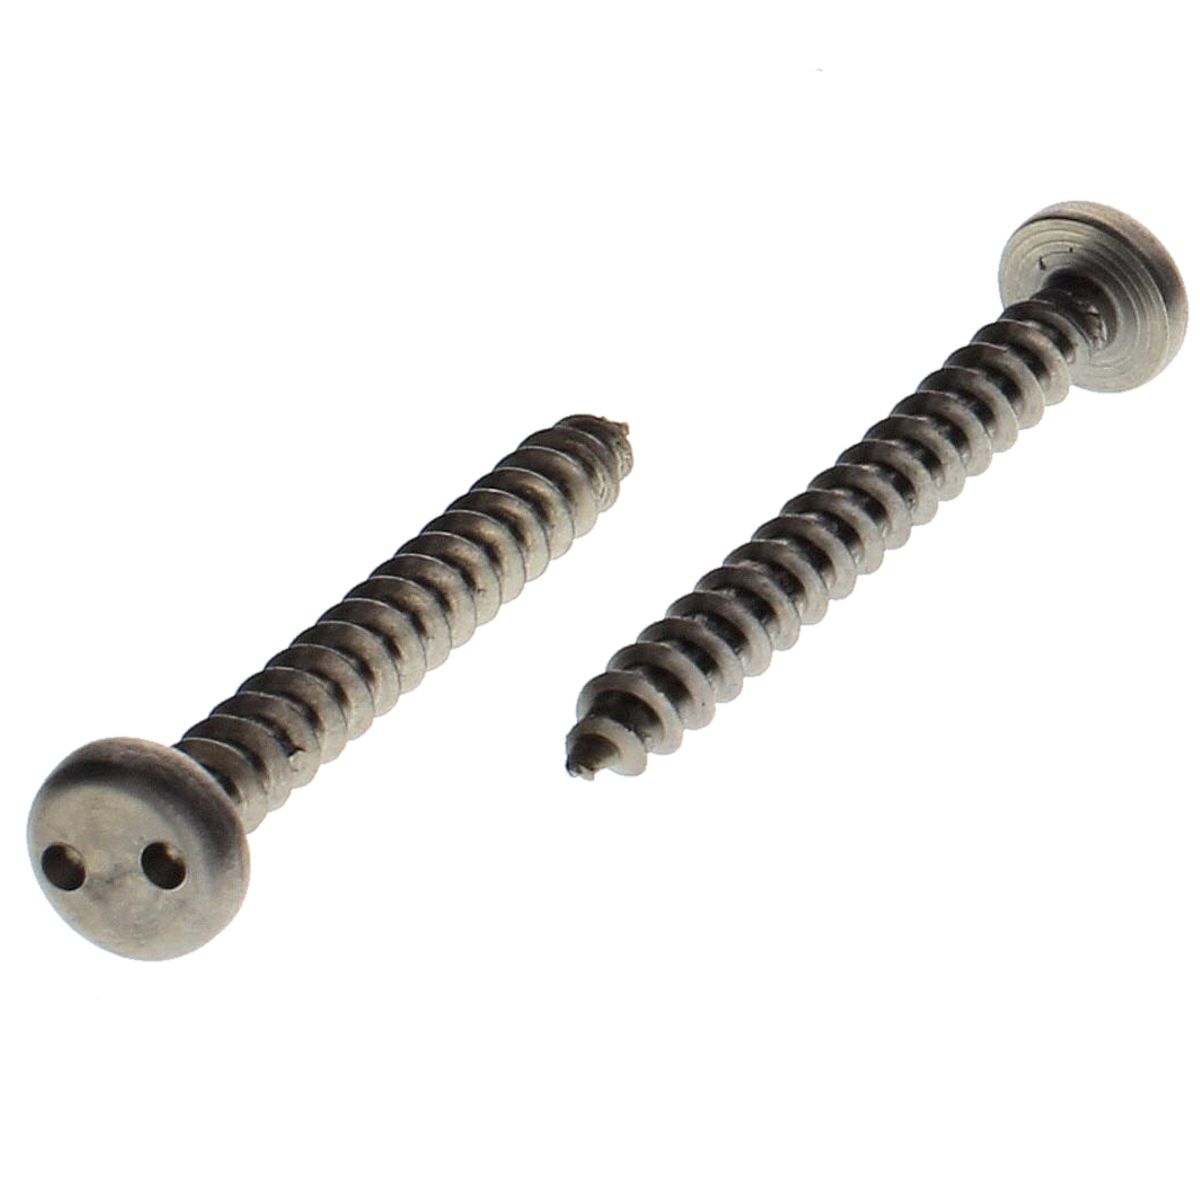 #12 x 1-1/2" Pan Head Spanner Security Tapping Screws — 18-8 Stainless Steel, 100/PKG